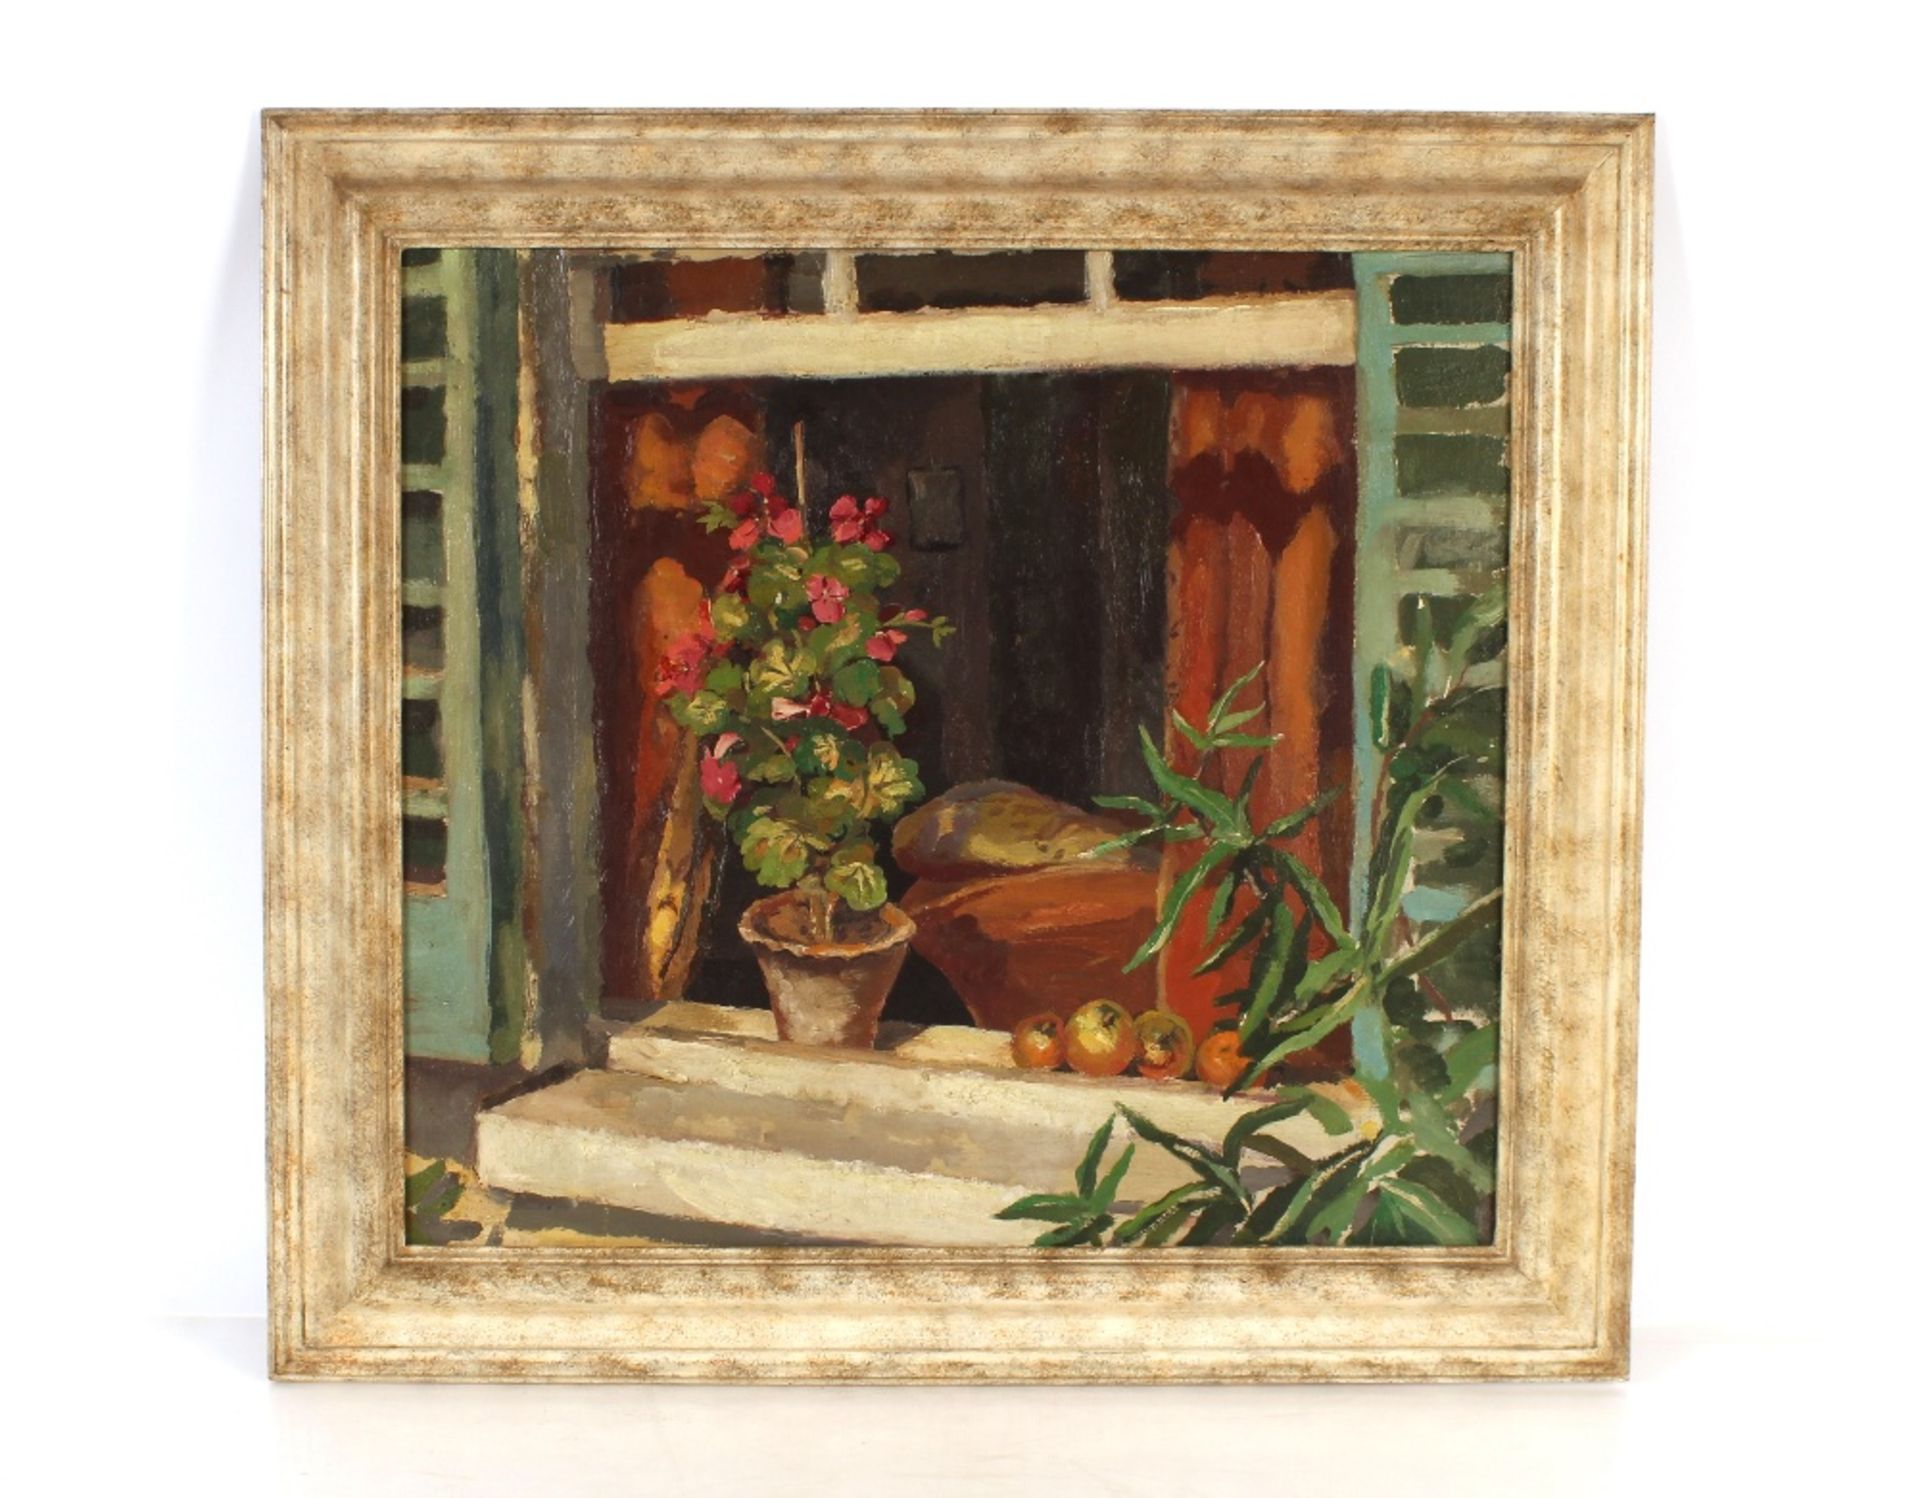 Attributed to Allan Walton, study off lowers and fruit on a window ledge, unsigned oil on canvas, - Image 2 of 4